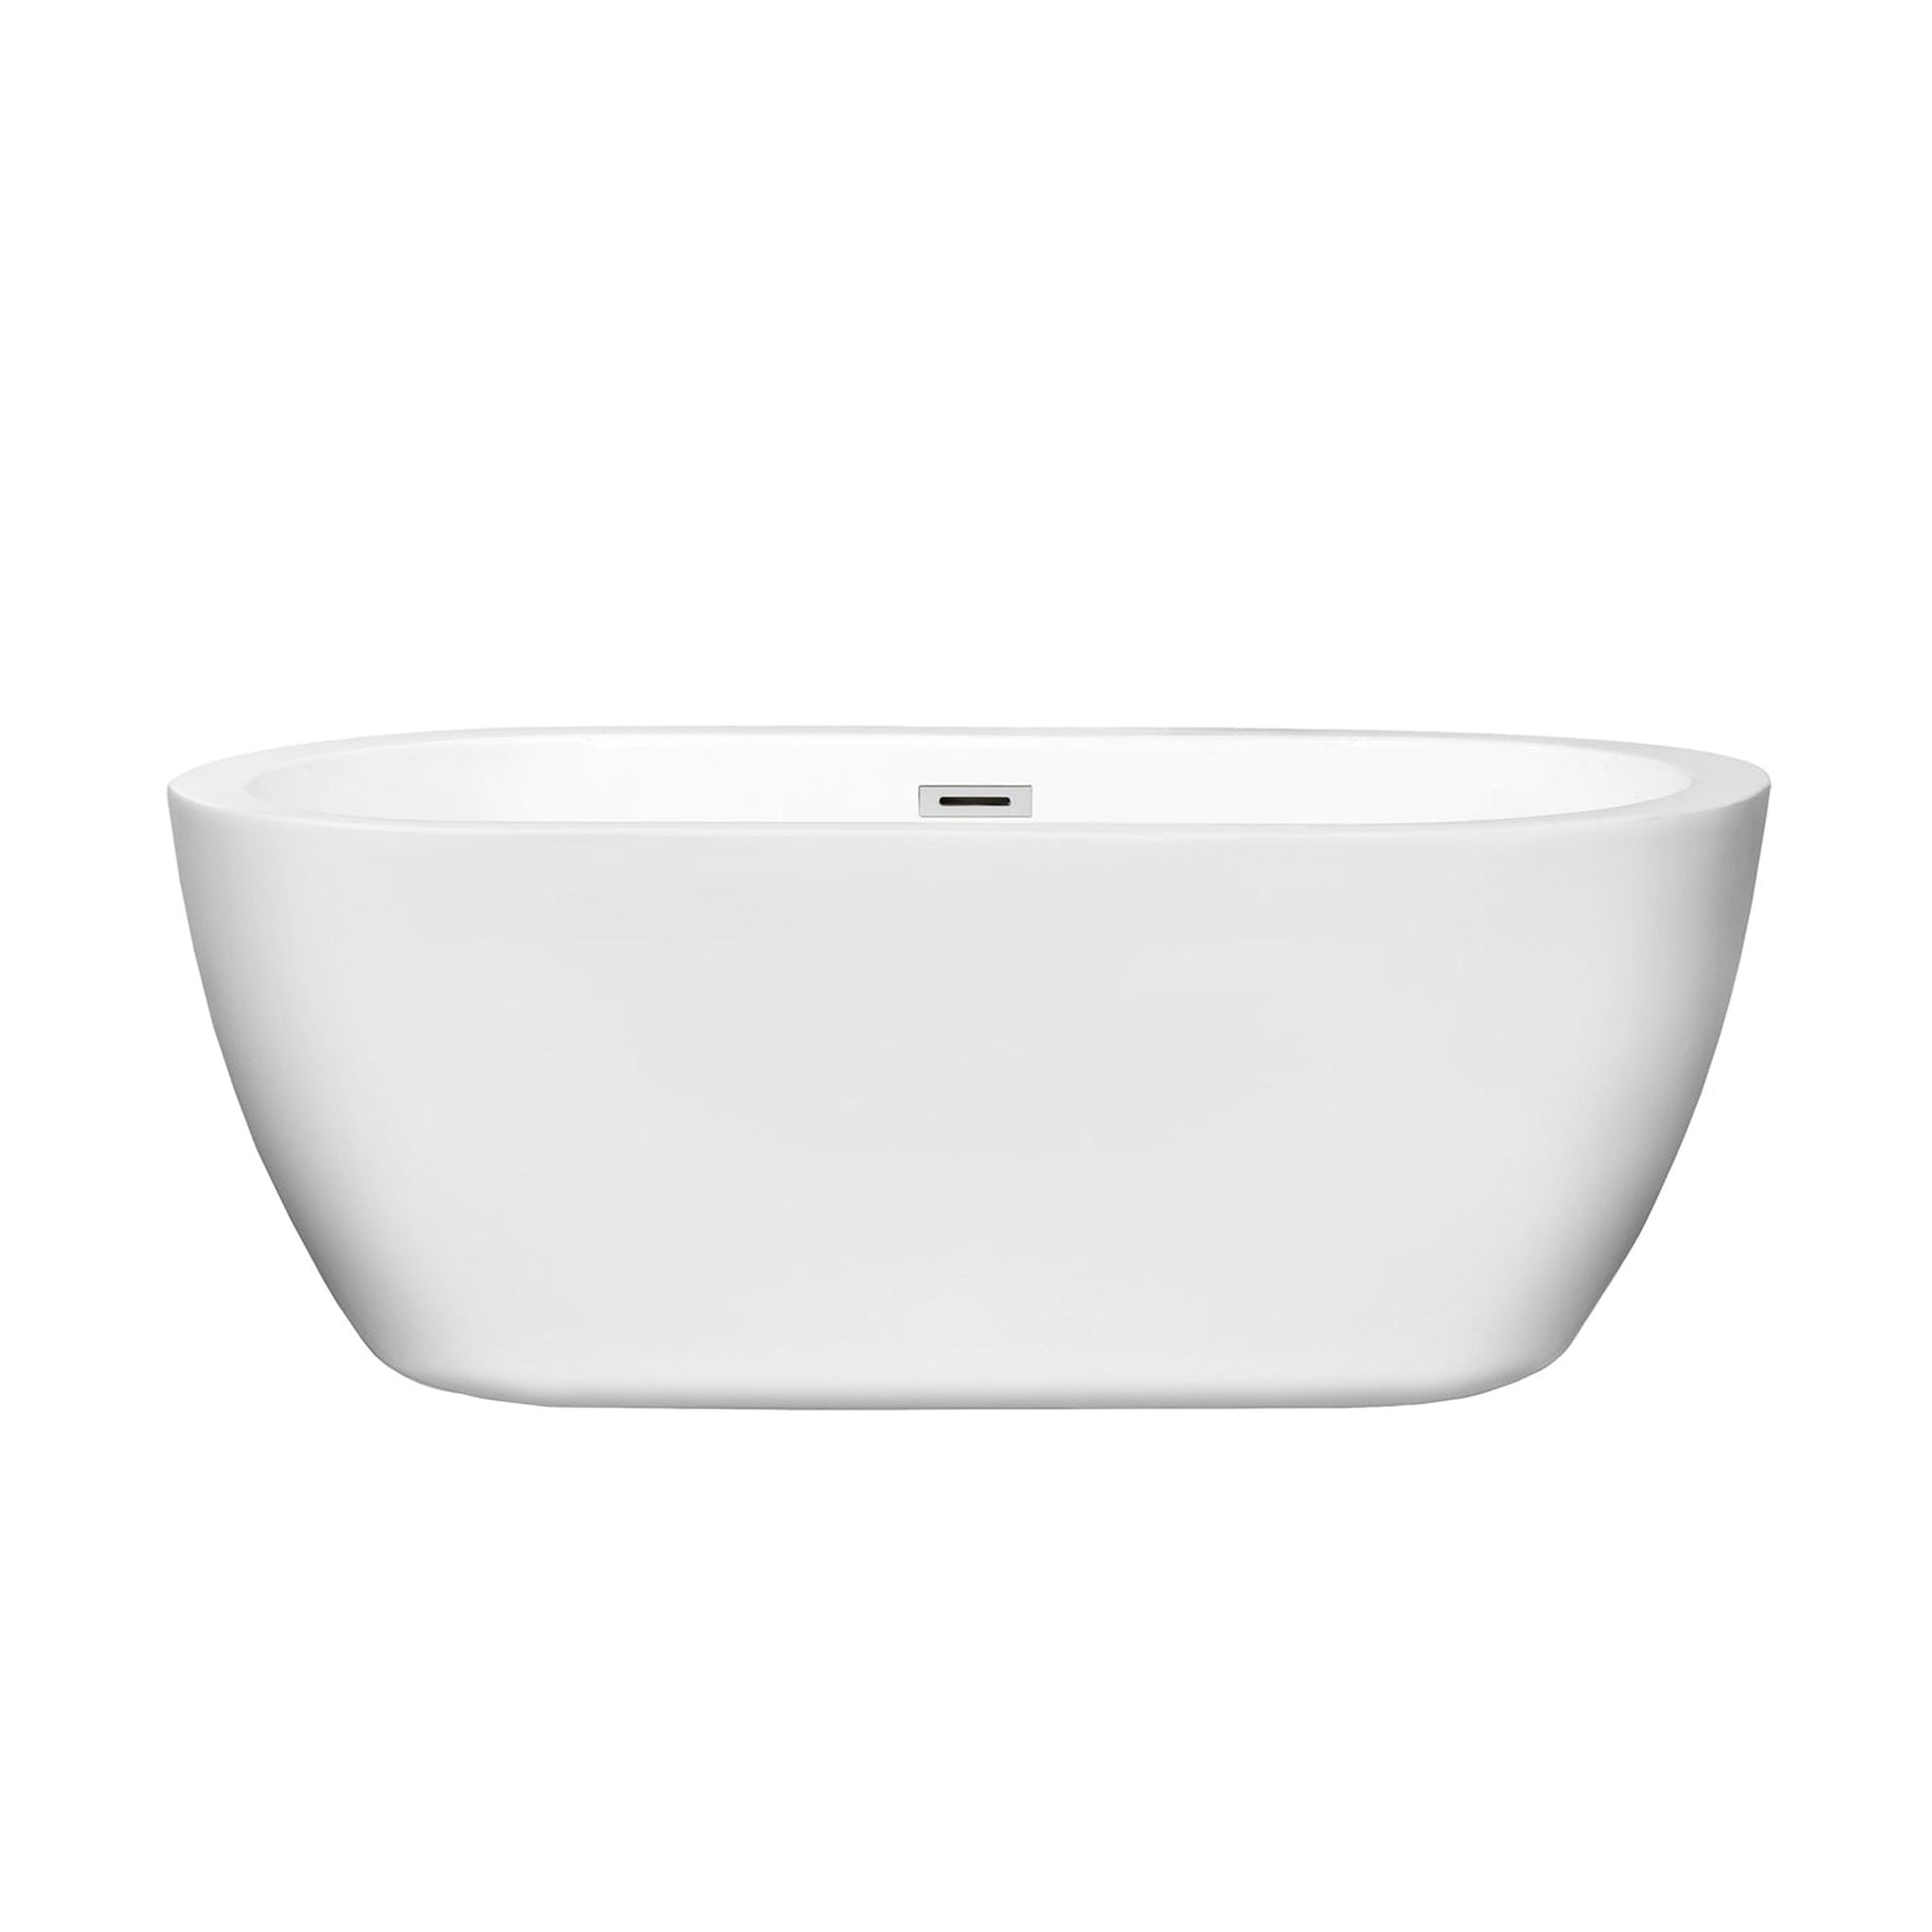 Wyndham Collection Soho 60" Freestanding Bathtub in White With Polished Chrome Drain and Overflow Trim